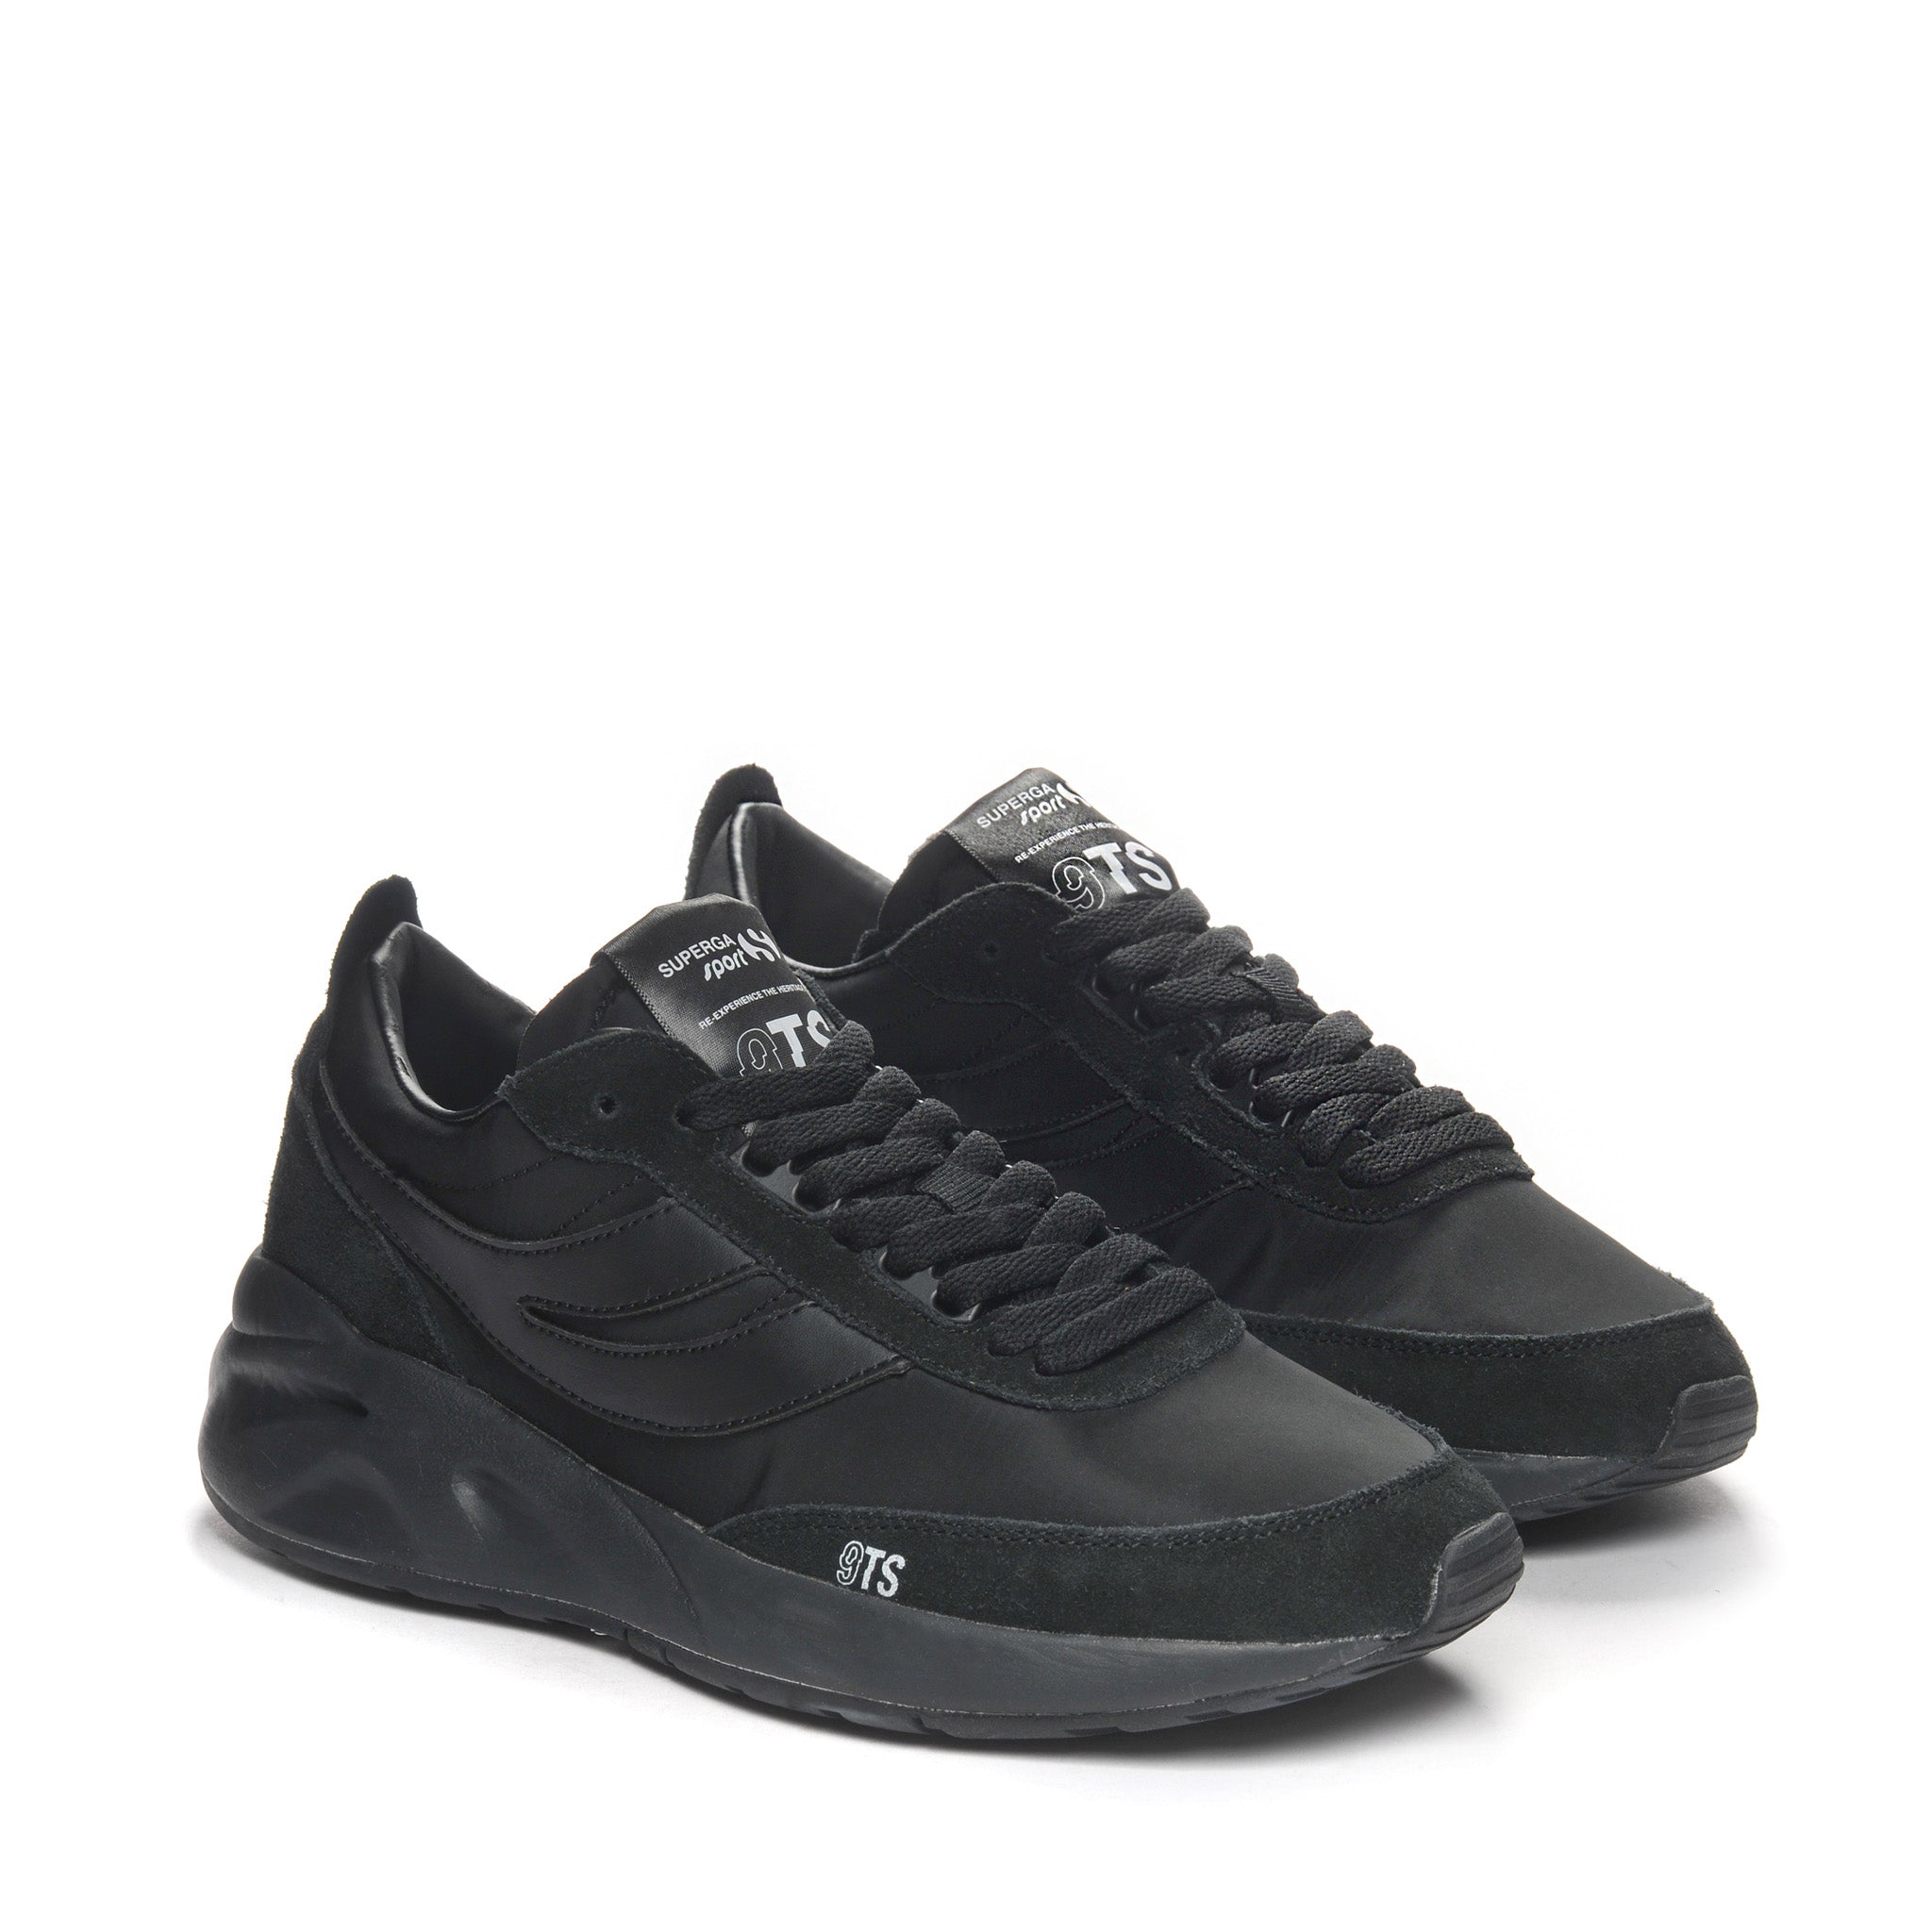 Superga 4089 Training 9Ts Slim Sneakers - Black. Front view.